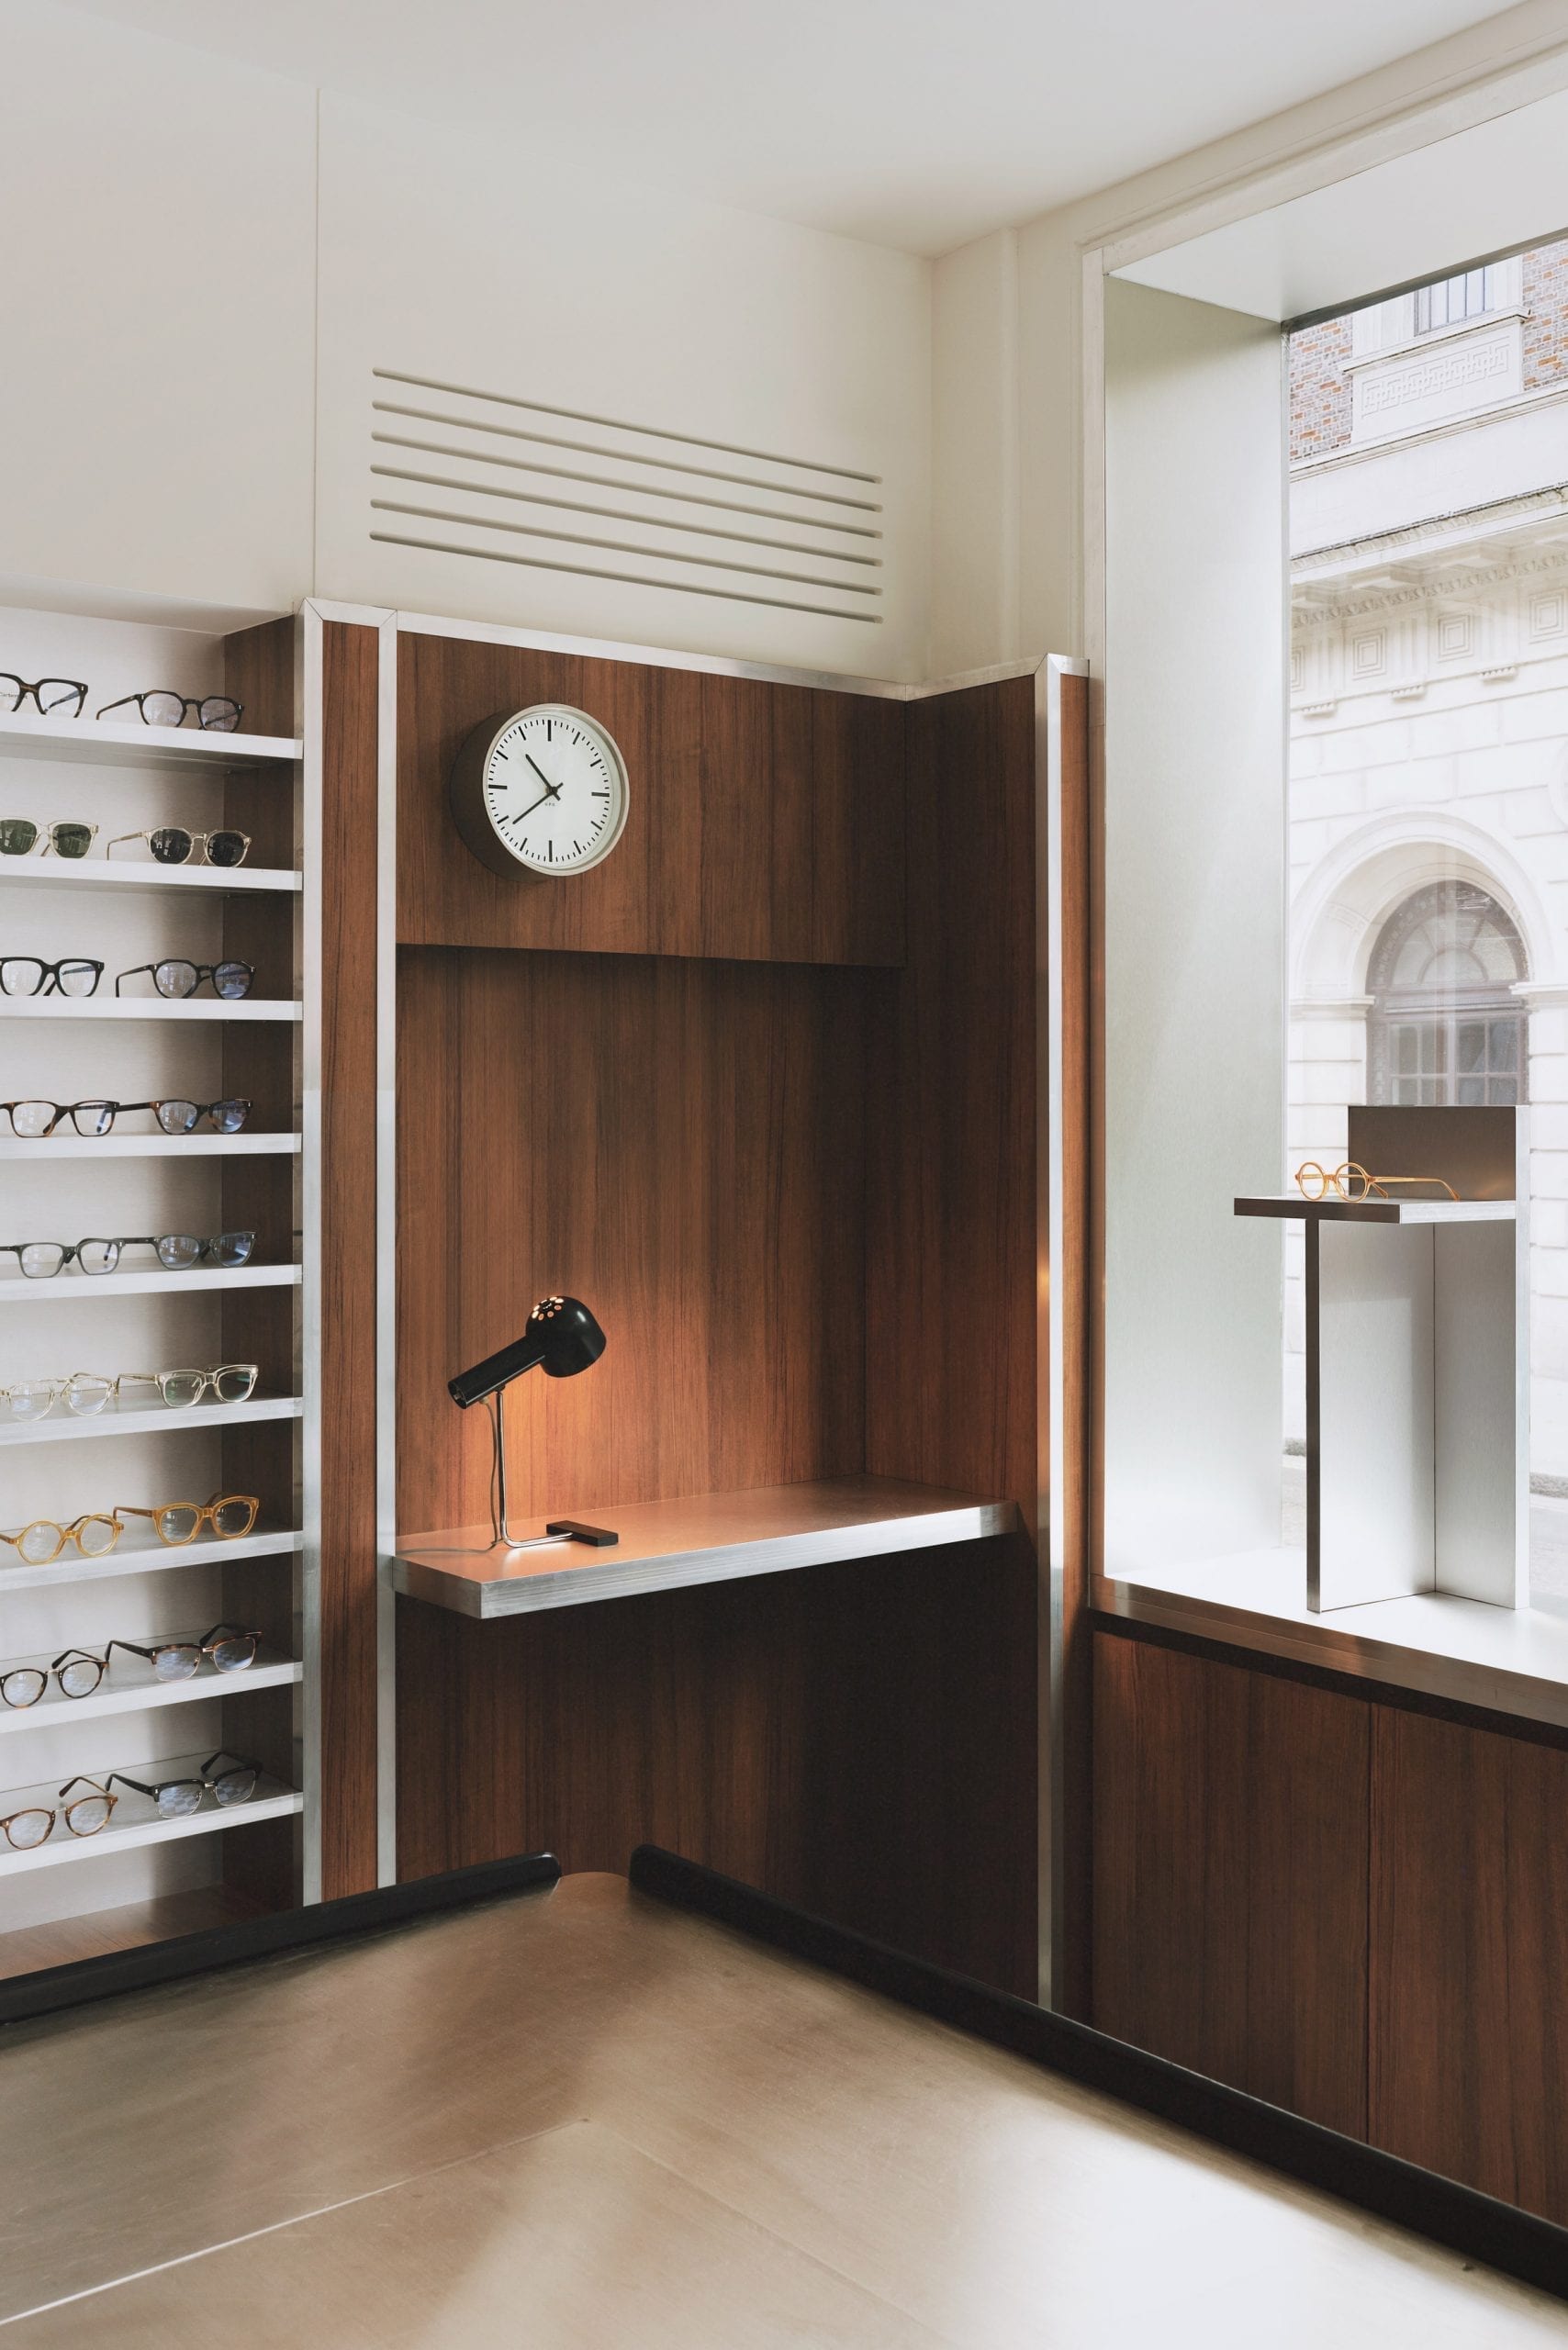 Desk nook with clock and glasses display in eyewear store by Child Studio